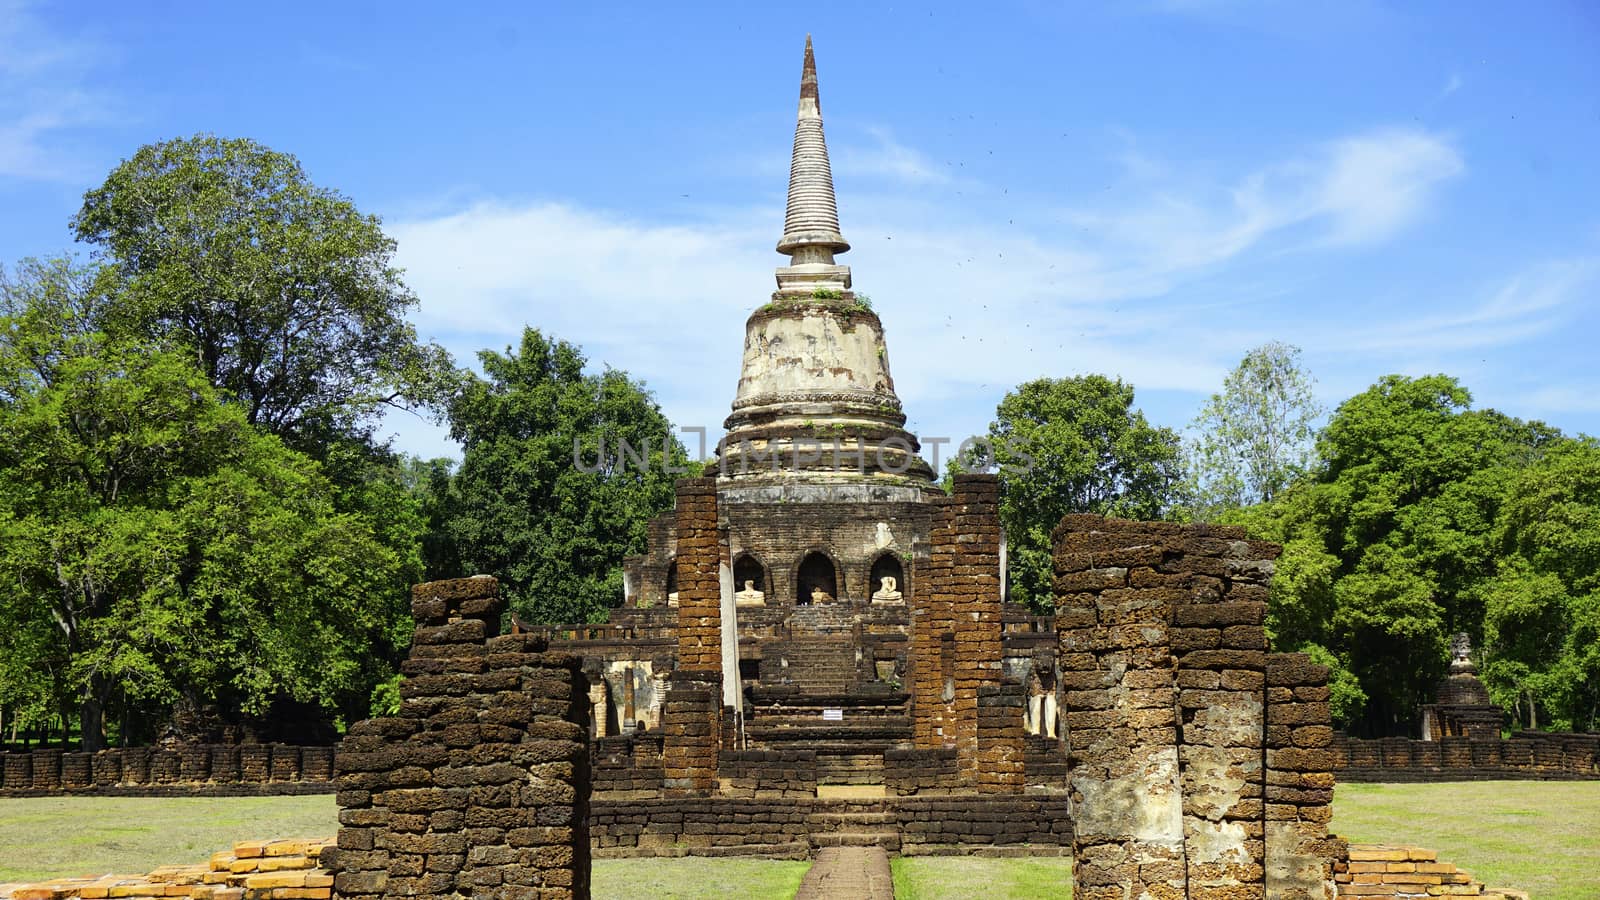 Historical Park Wat chang lom temple center main approach in Sukhothai world heritage

